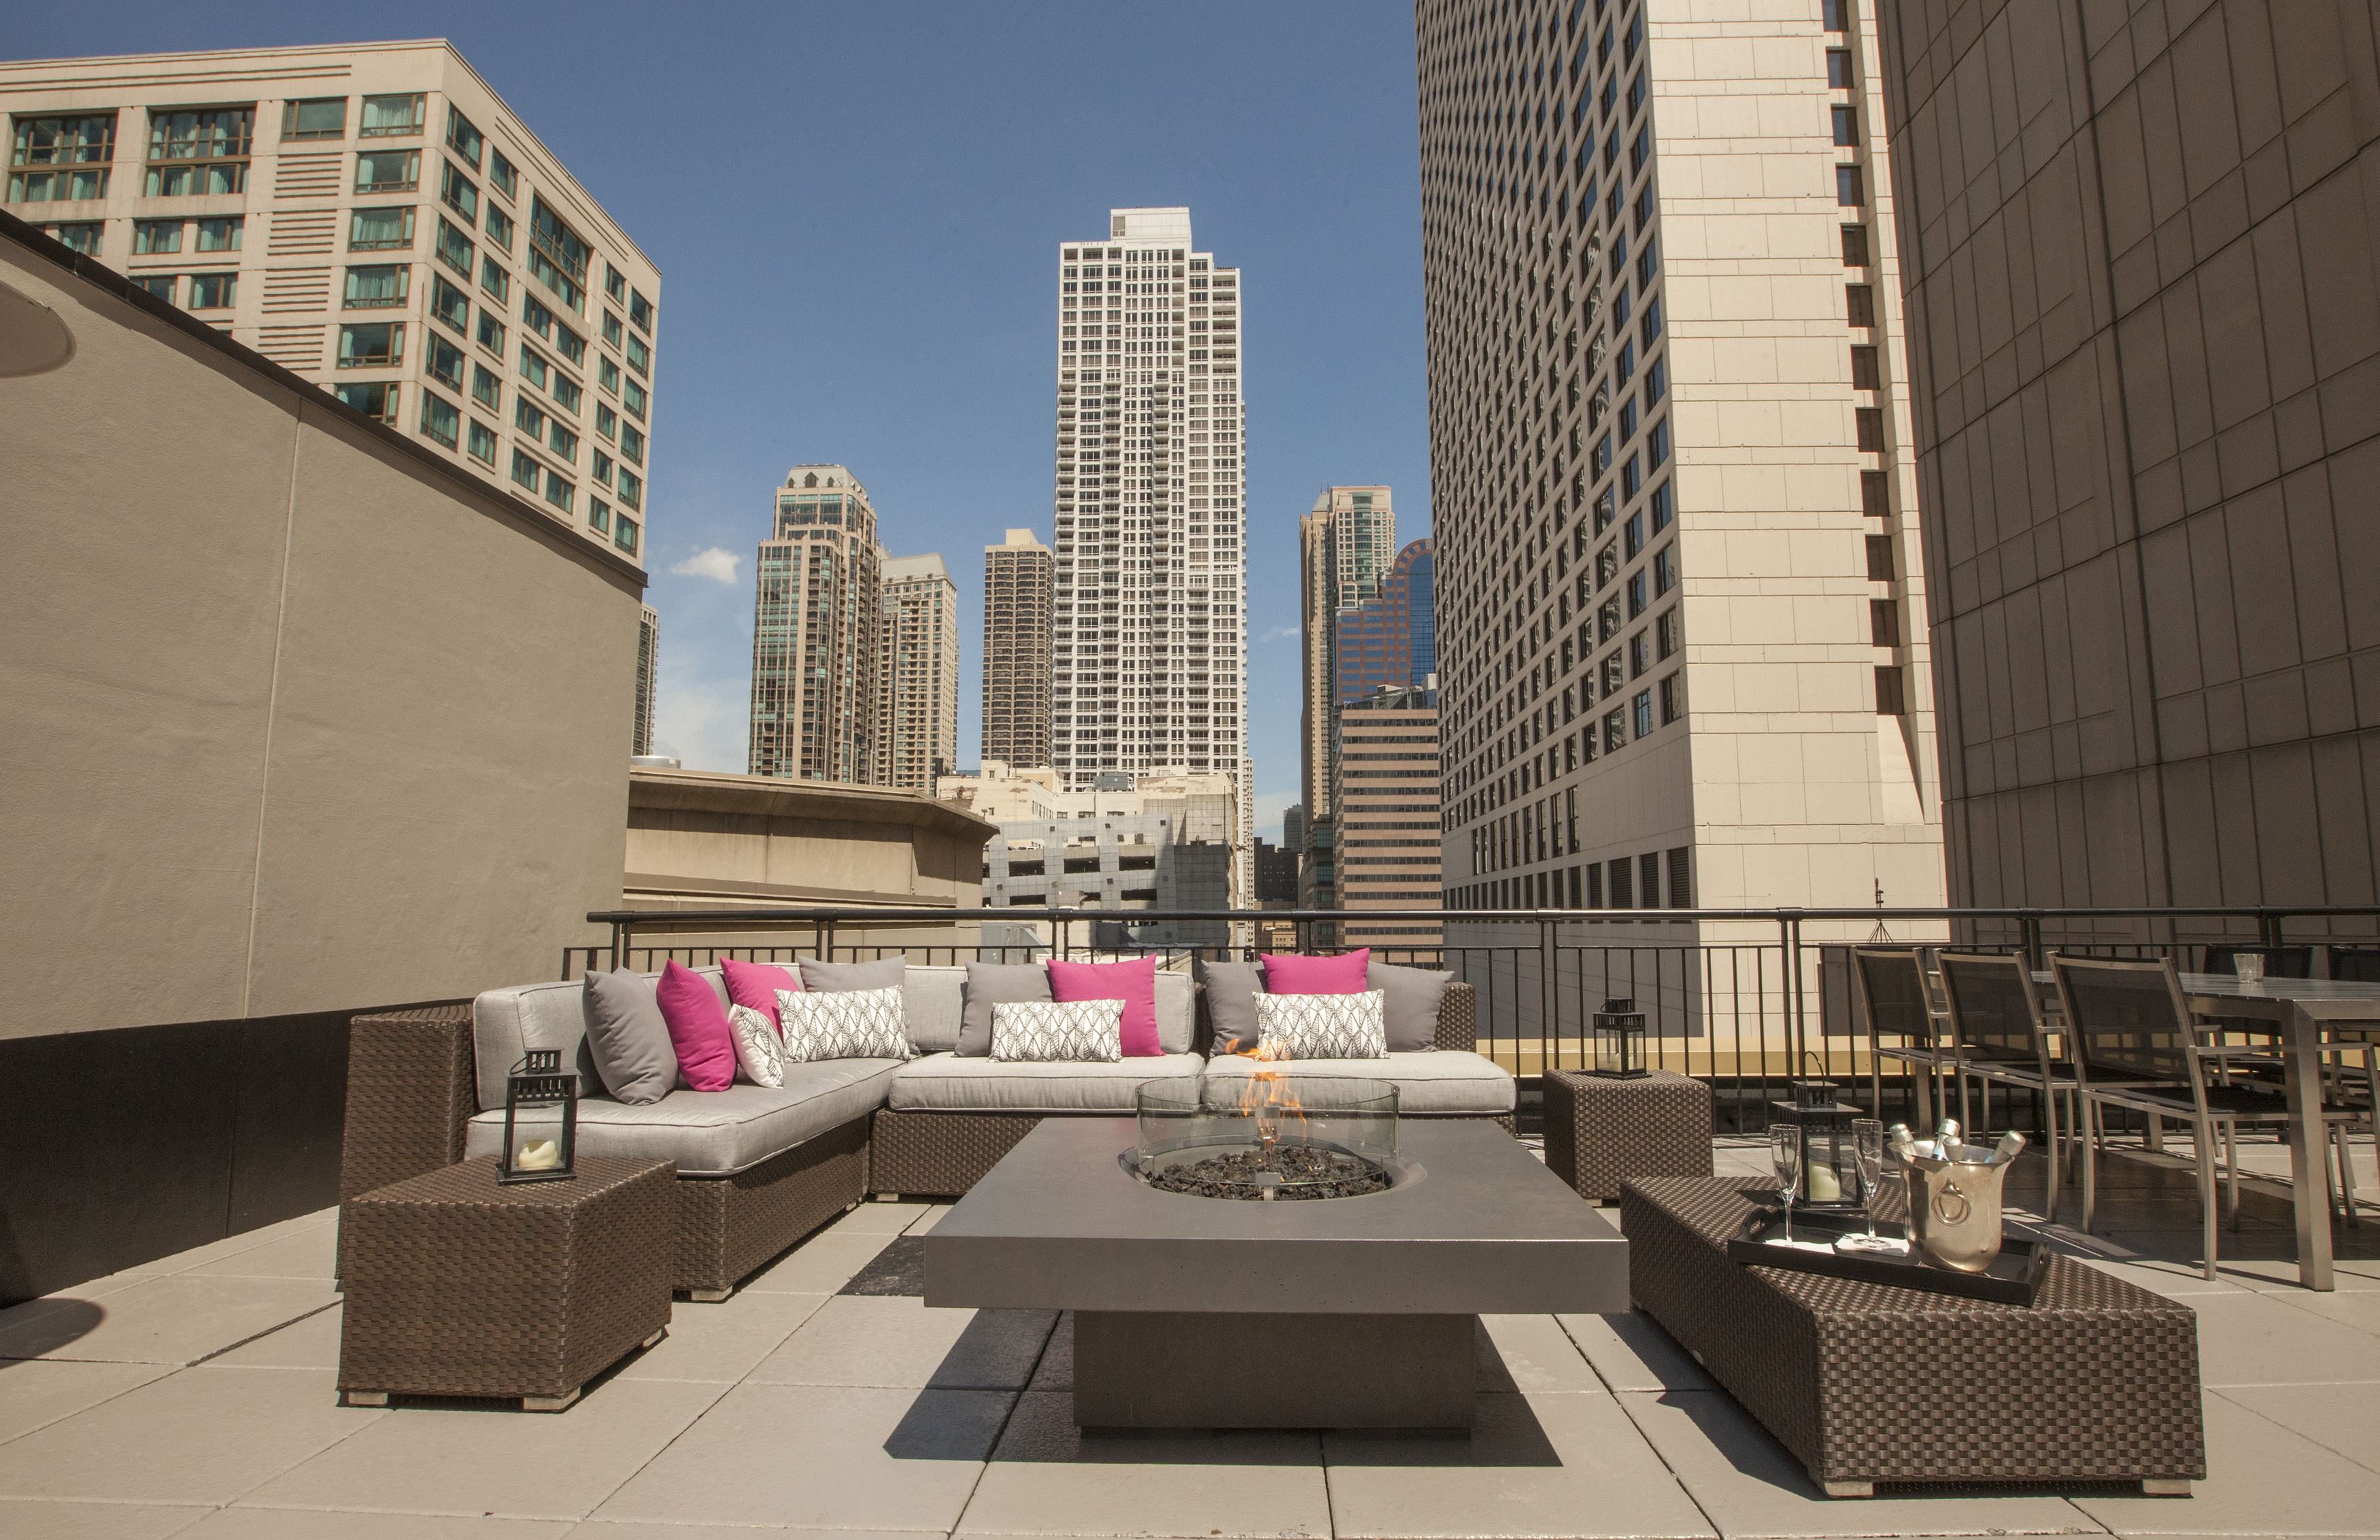 A rooftop lounge on top of a hotel, the Chicago skyline is in the background